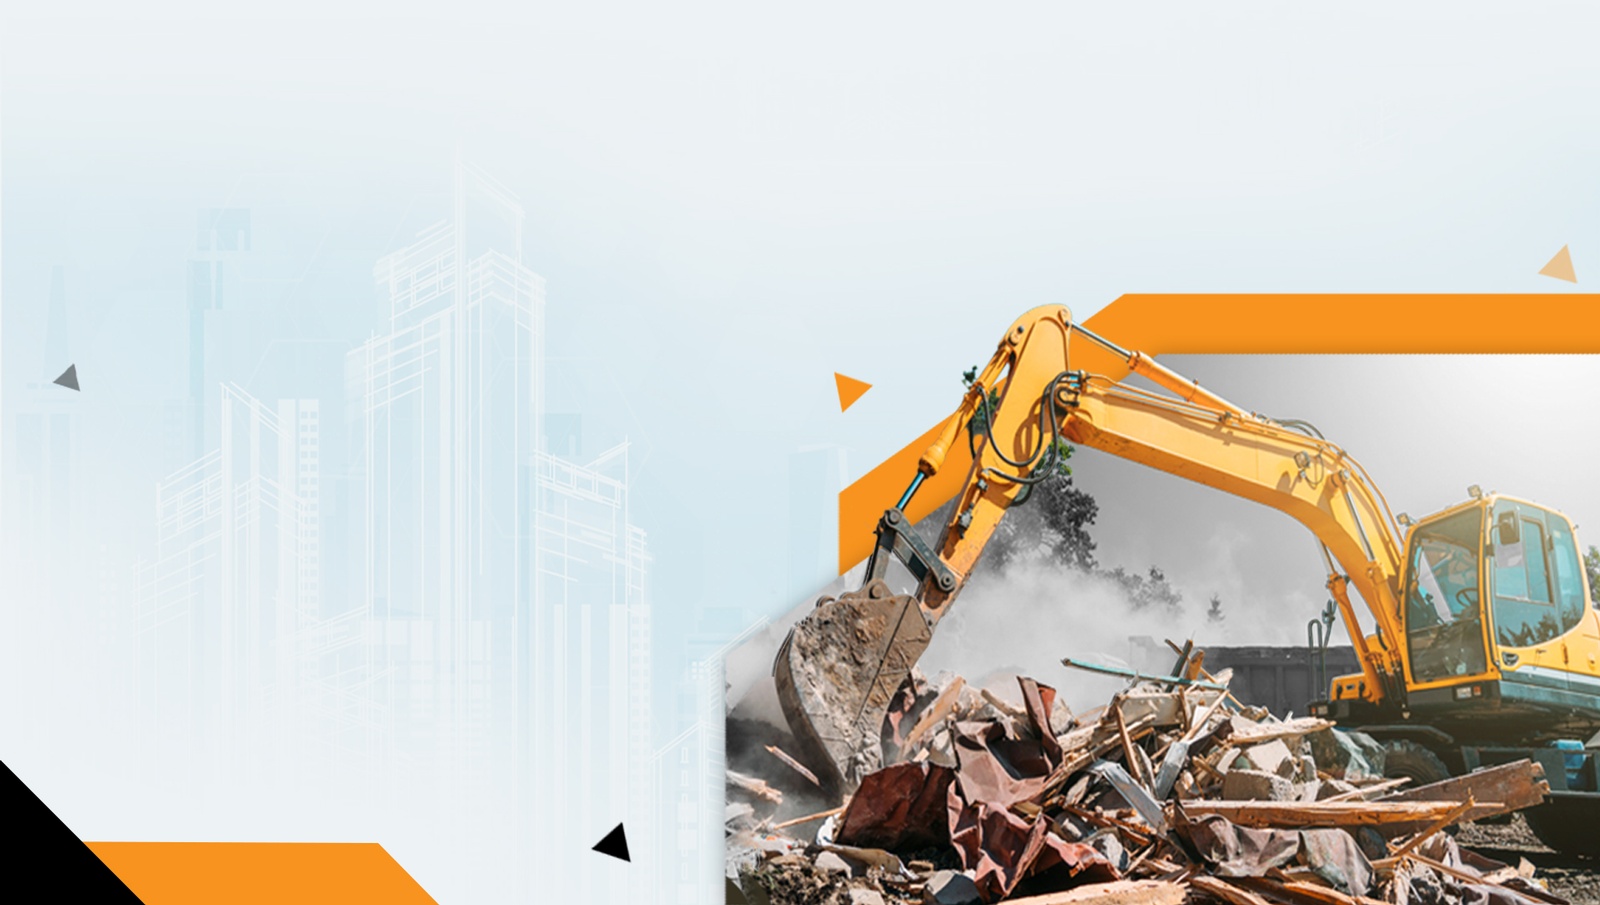 We provide full-scale demolition and hazardous material abatement services in Ottawa within budget.